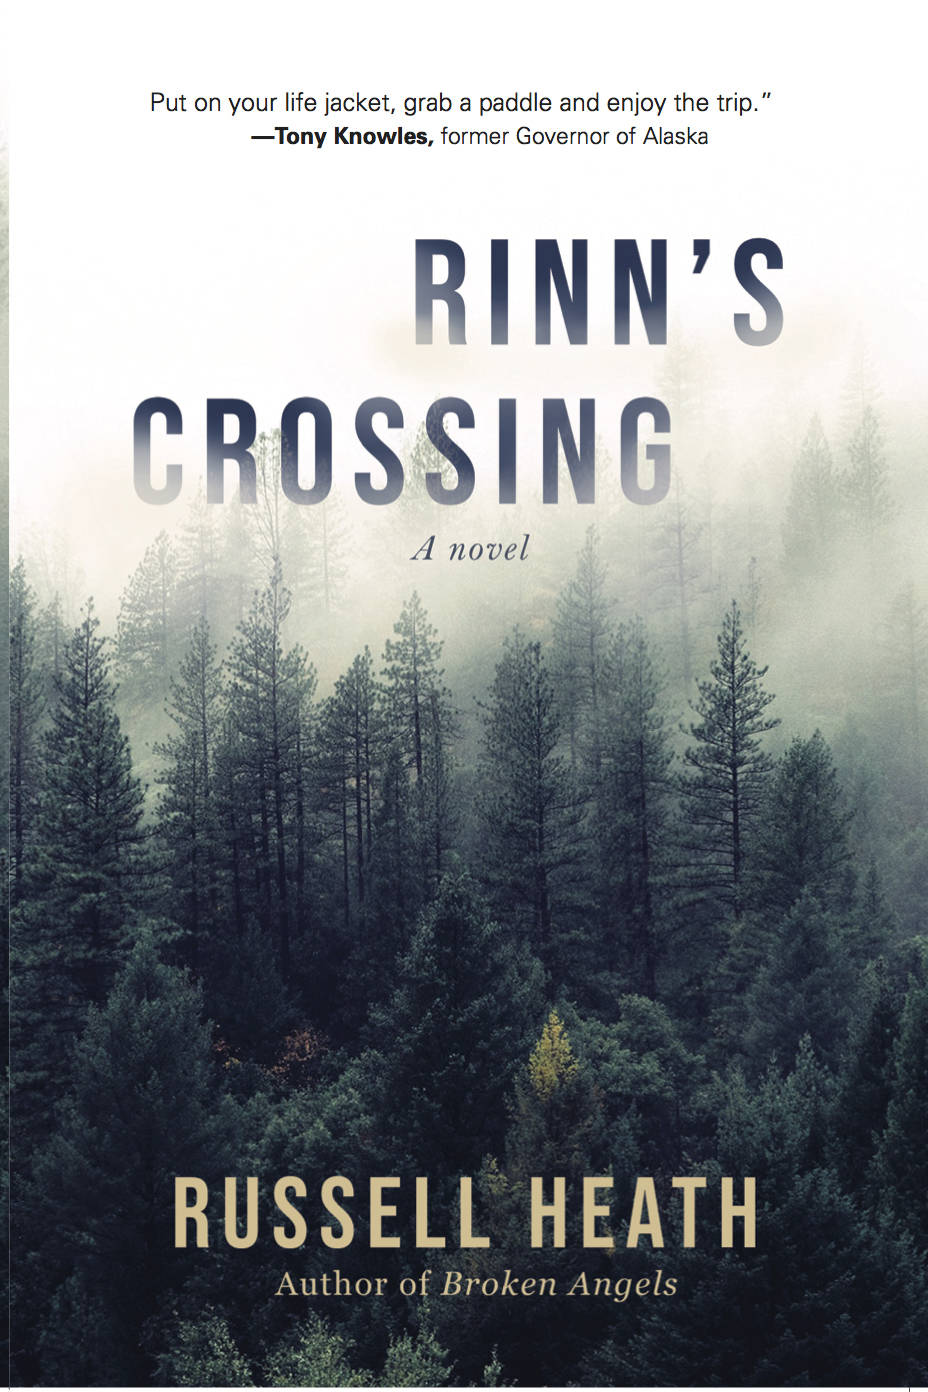 Russell Heath’s new book “Rinn’s Crossing” is a political thriller set in Southeast Alaska. A virtual launch event will be held with Hearthside Books July 16, 2020. (Courtesy Photo } Russell Heath)